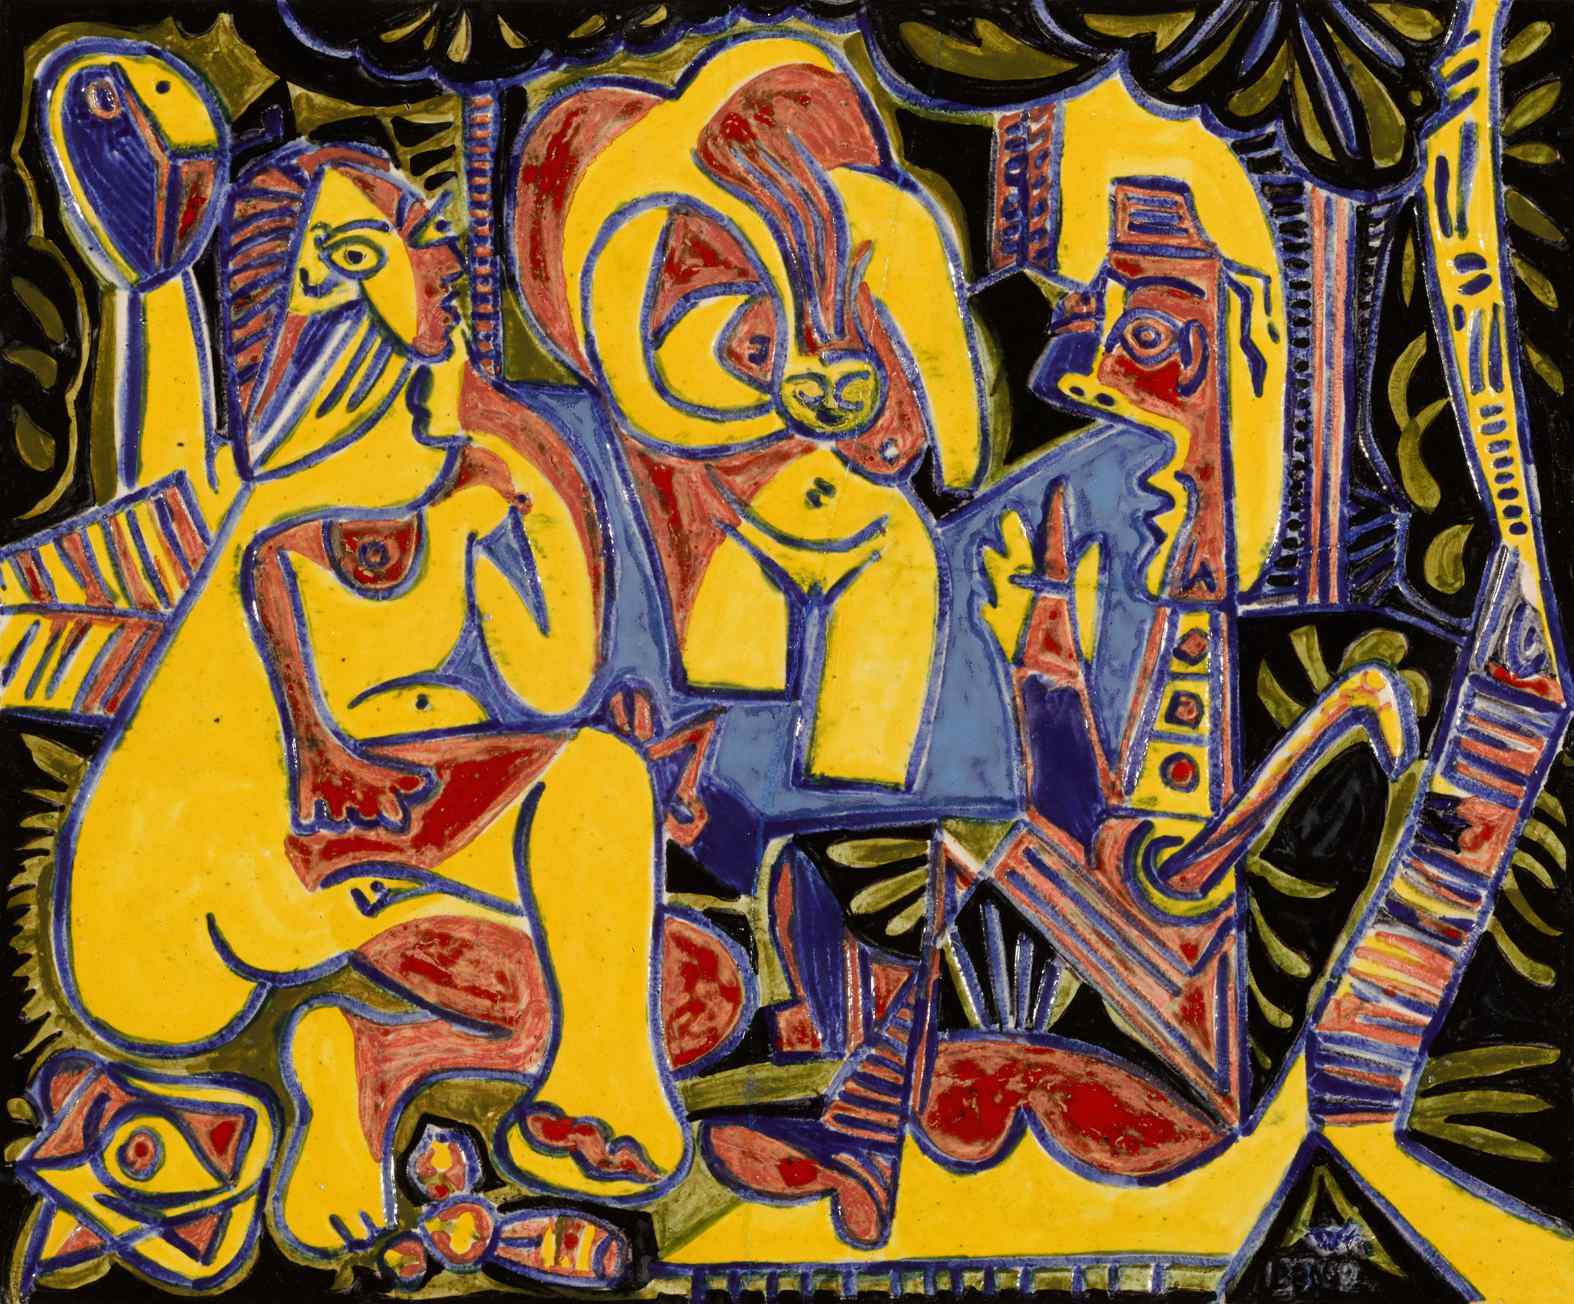 Picasso’s Le Dejeuner Sur L’herbe which sold for $2.2 million during Sotheby’s Picasso Masterworks sale.